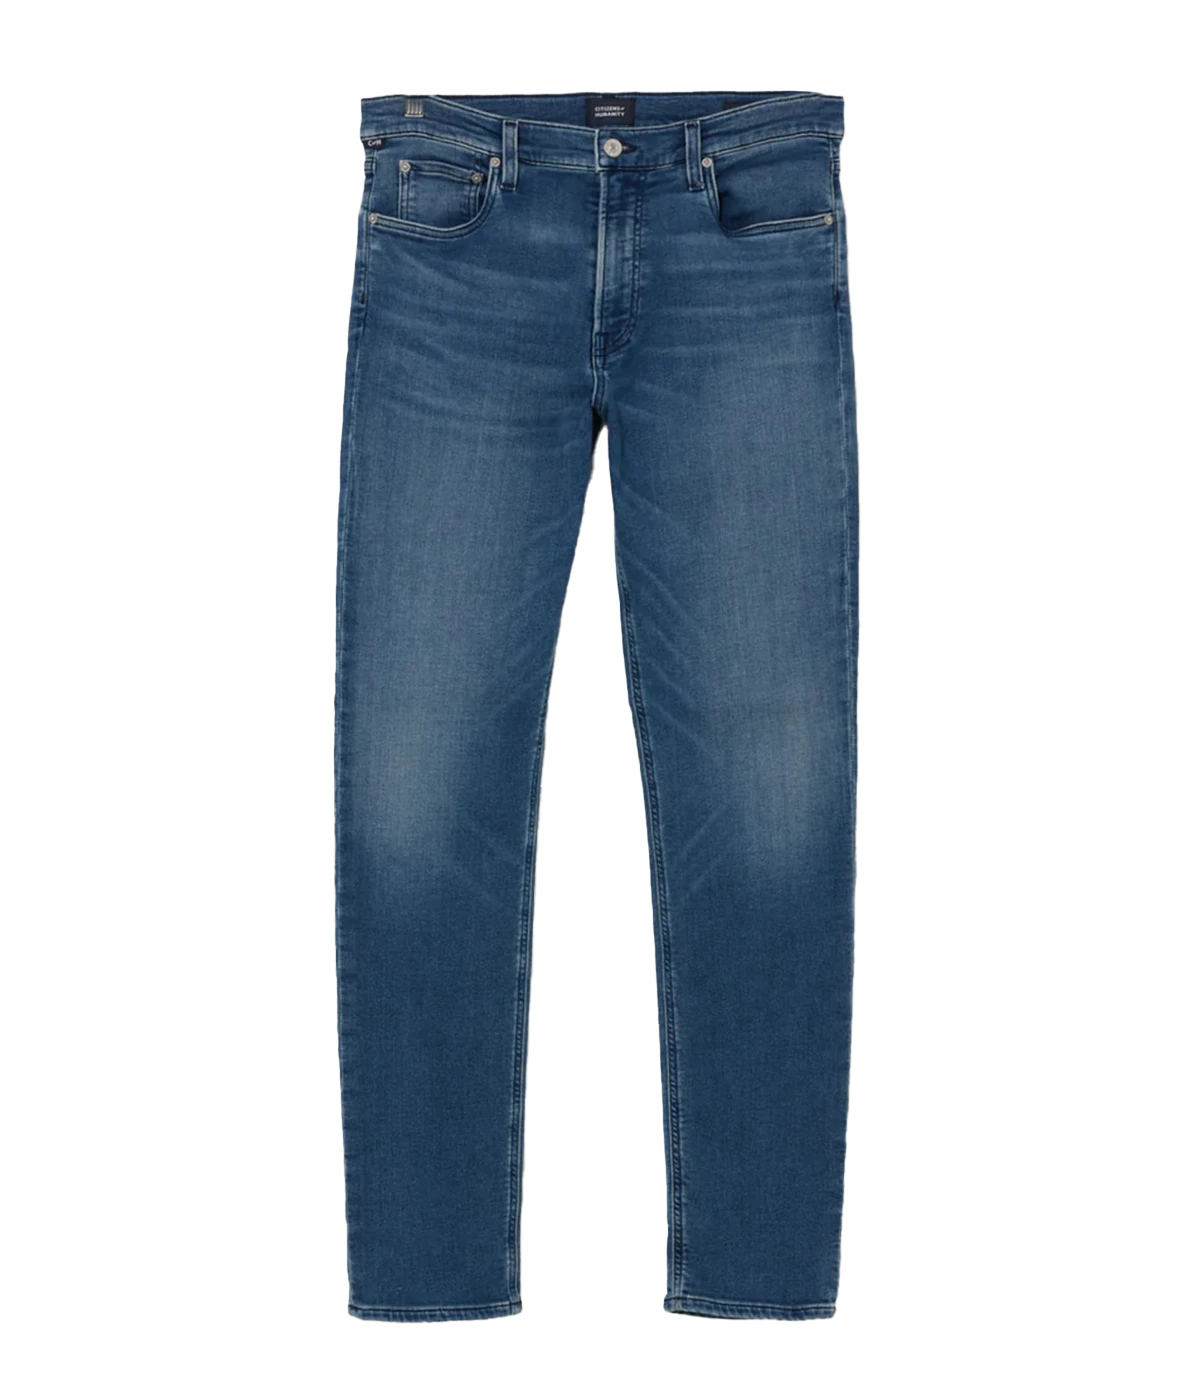 A classic slim straight jean in a medium indigo by Citizens of Humanity. Clean silhouette with a subtle taper from the knee down. Clean silhouette, cut from a mid-weight denim reminiscent of French terry. Comfortable wash and wear jeans. 